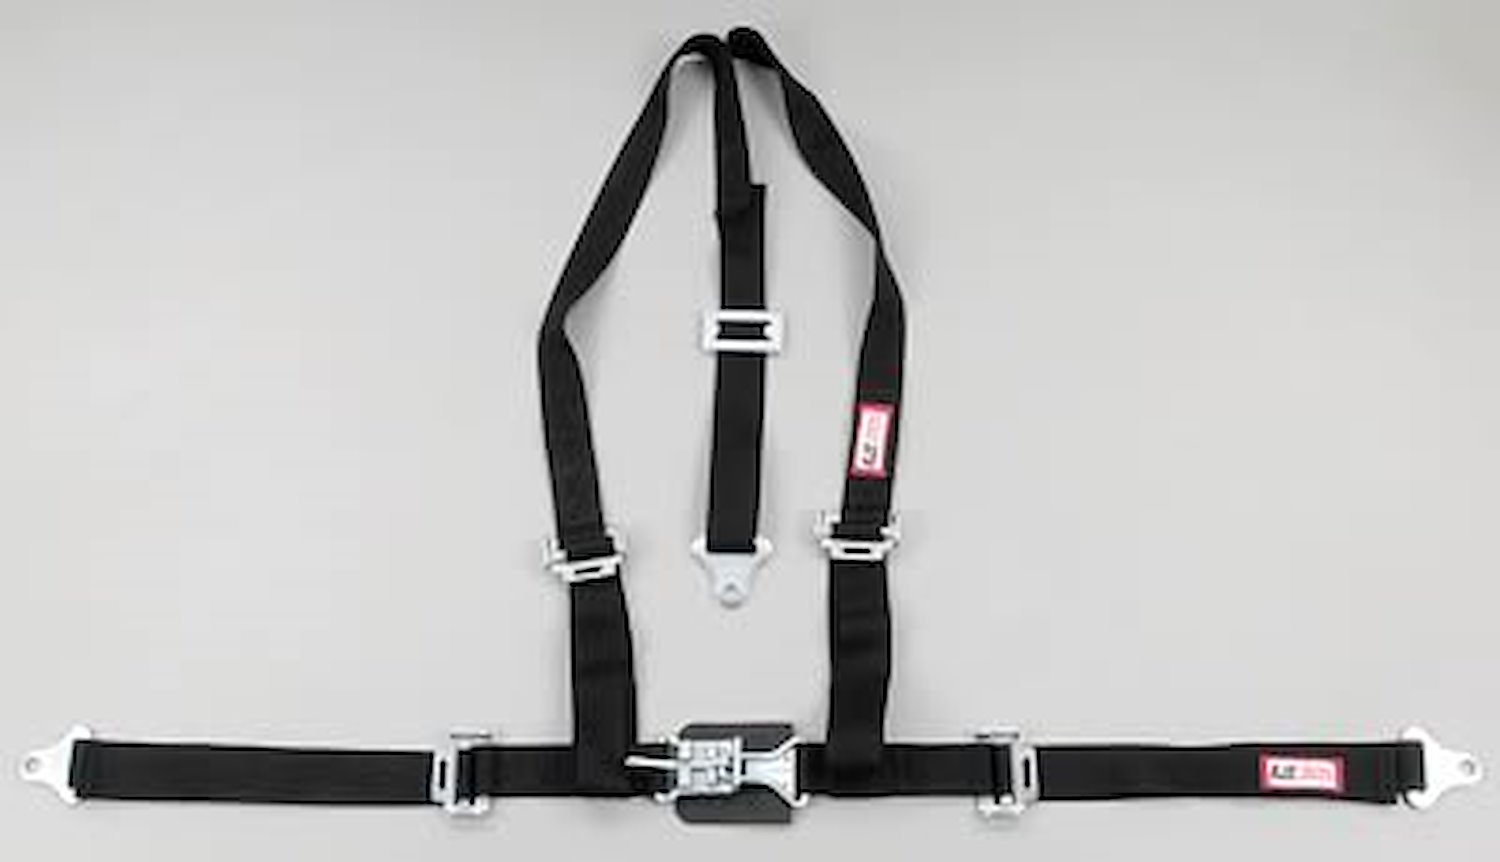 NON-SFI L&L HARNESS 2 PULL UP Lap Belt SNAP SEWN IN 2 S.H. Y FLOOR Mount w/STERNUM STRAP WRAP/BOLT OD GREEN